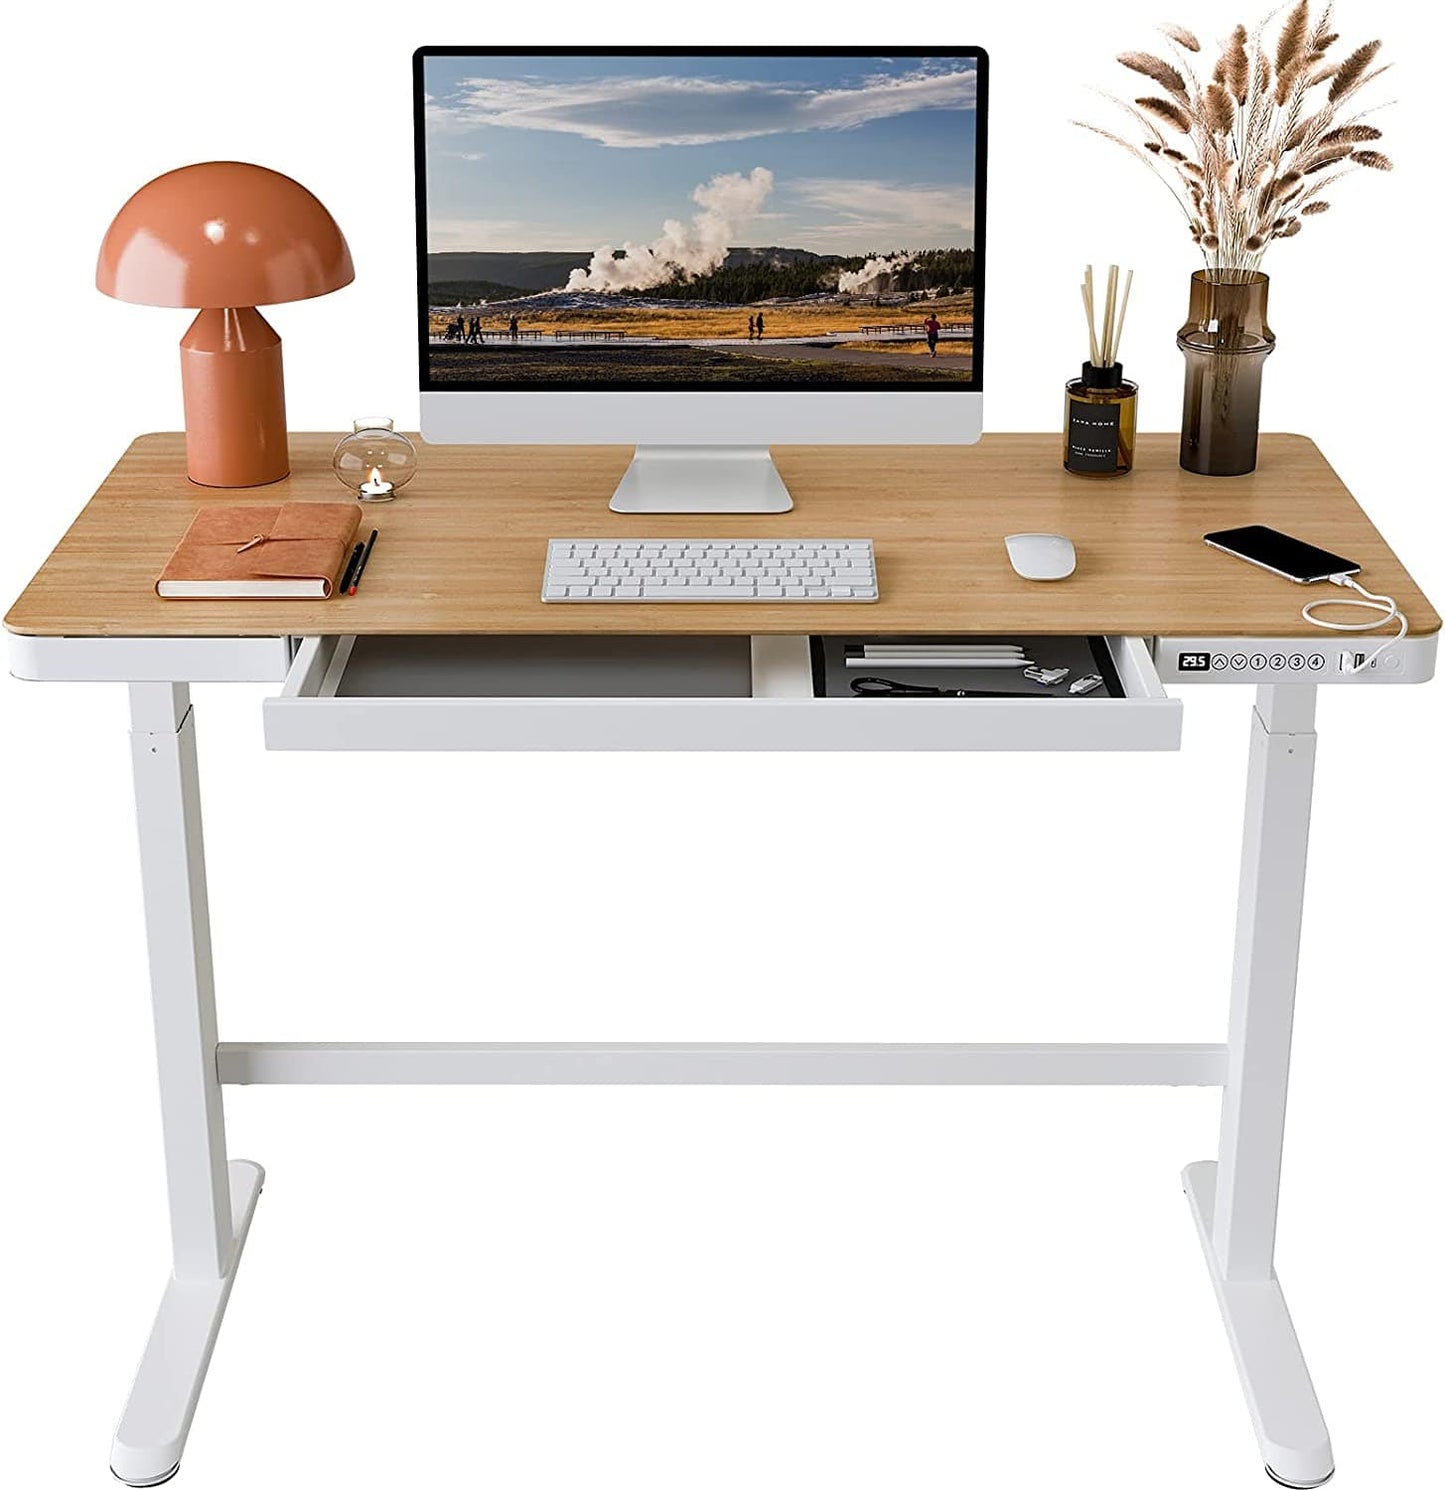 Standing Desk Drawers Electric Sit Stand up Desk Storage 48 X 24 Inches Bamboo Texture Desktop Height Adjustable White Frame New